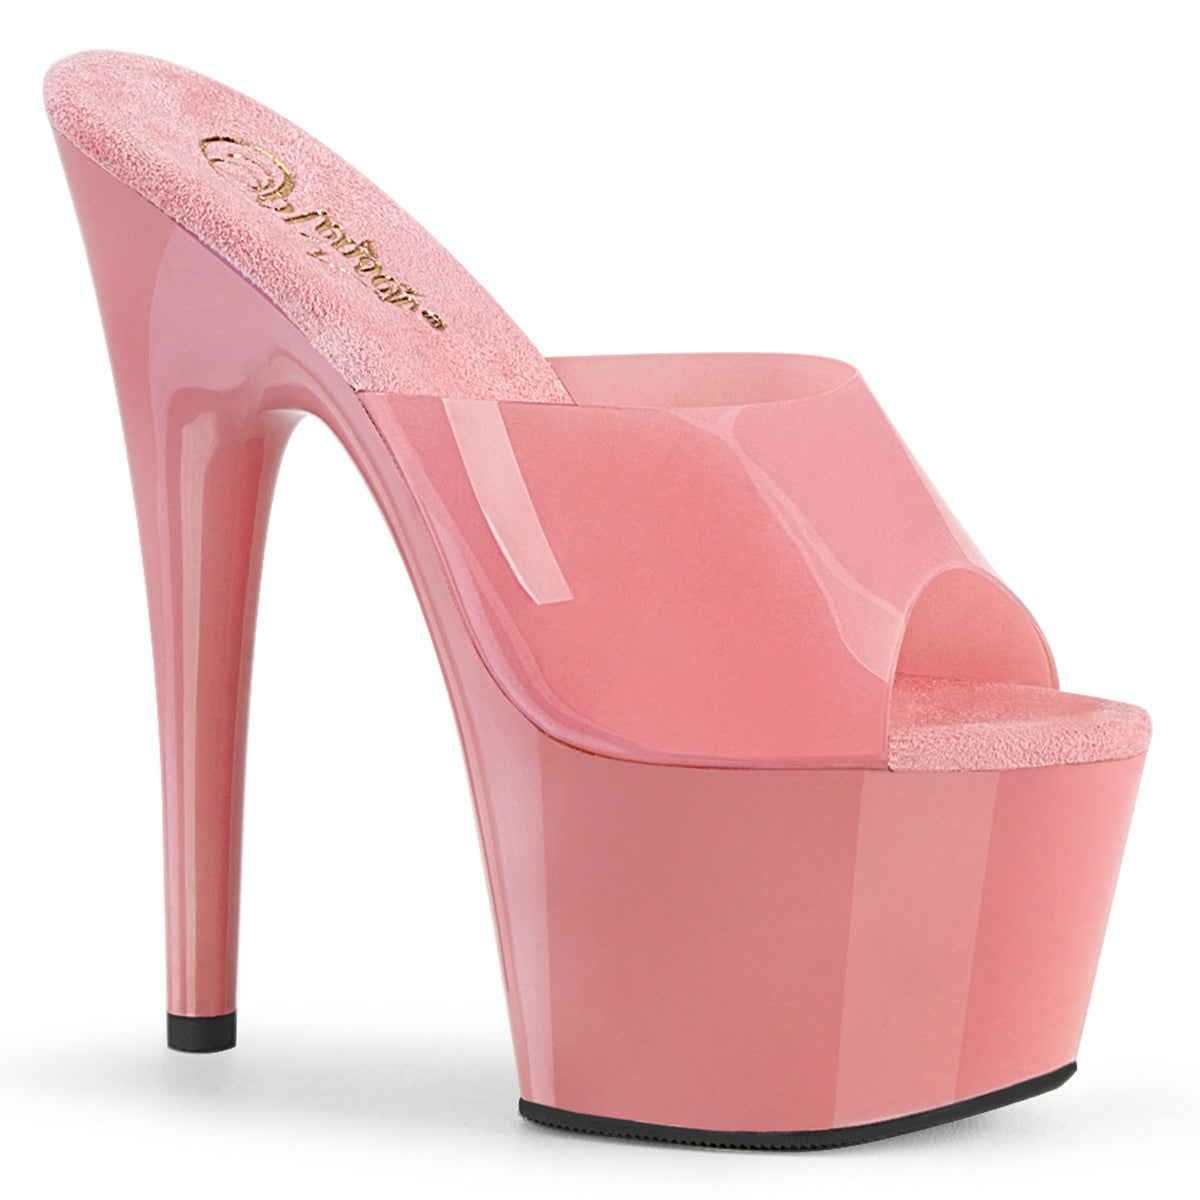 ADORE-701N Pleaser 7 Inch Heel Baby Pink Pole Dancing Shoes-Pleaser- Sexy Shoes